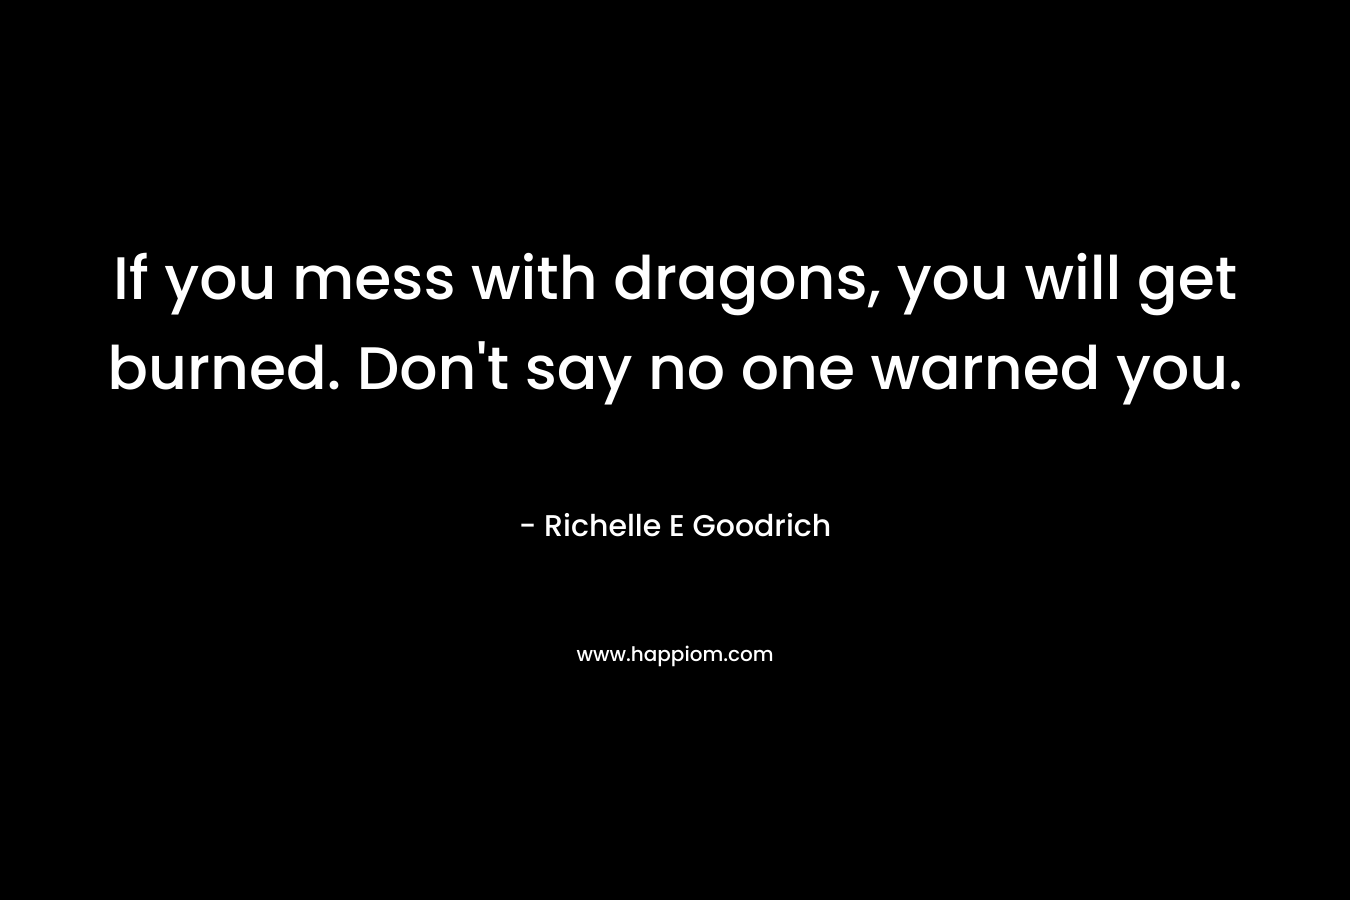 If you mess with dragons, you will get burned. Don't say no one warned you.